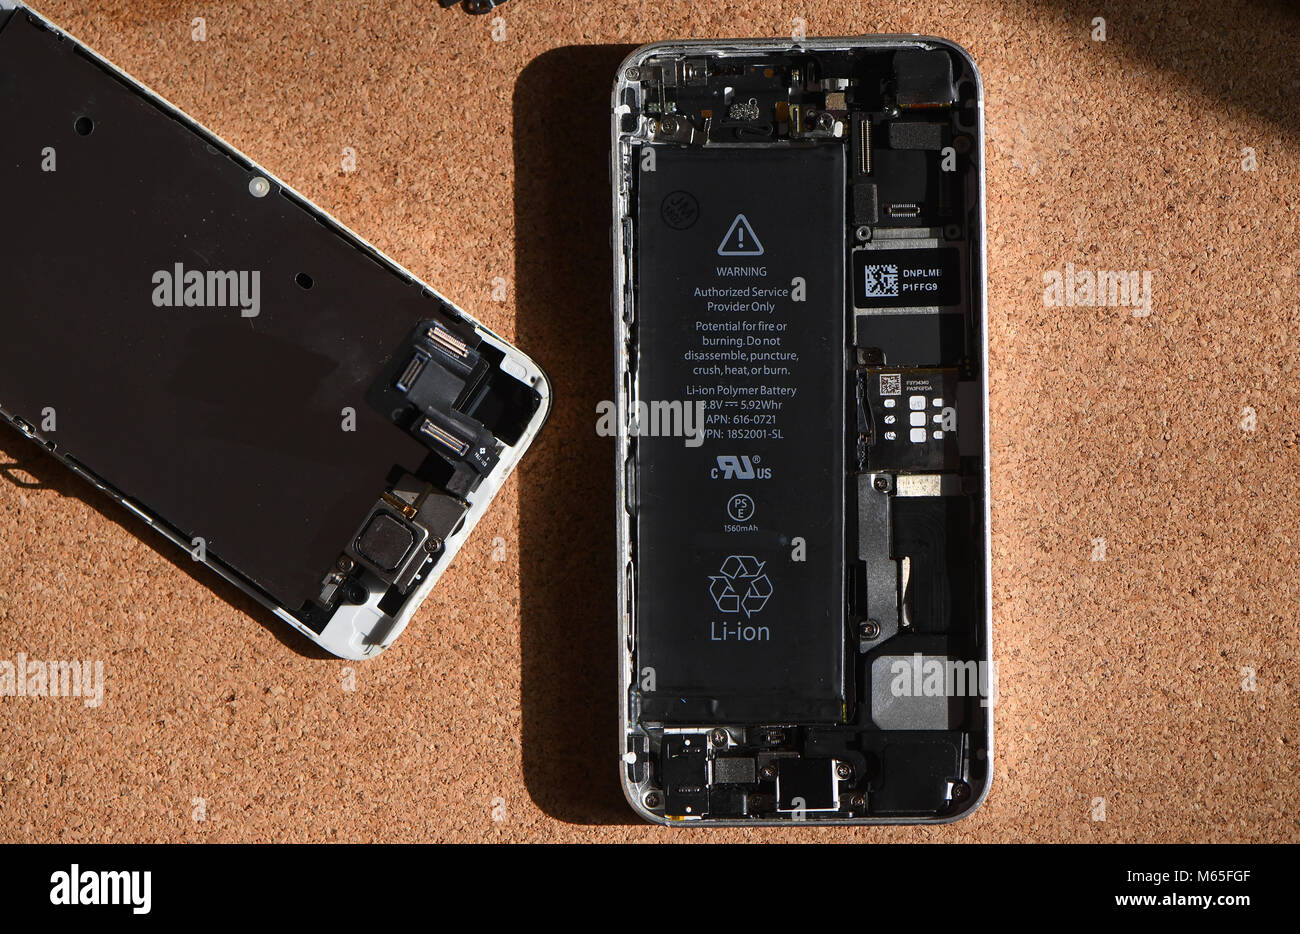 Home DIY replacement of a iPhone 5s battery showing phone opened with new and old battery and internals of phone. Stock Photo